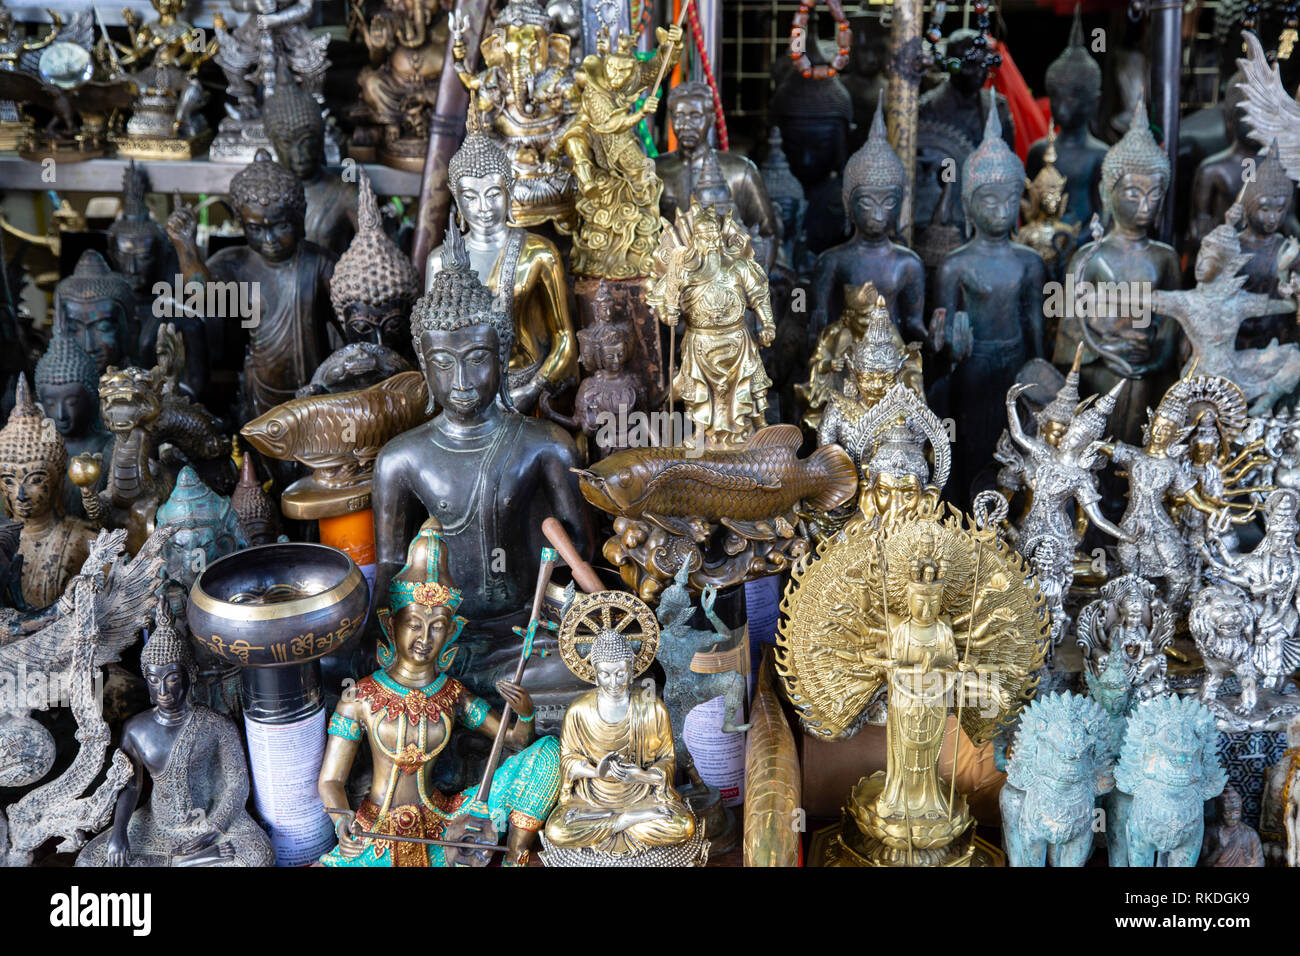 An arrangement of a collection of collectible buddha statue at Chatuchak weekend market in Bangkok, Thailand. Stock Photo